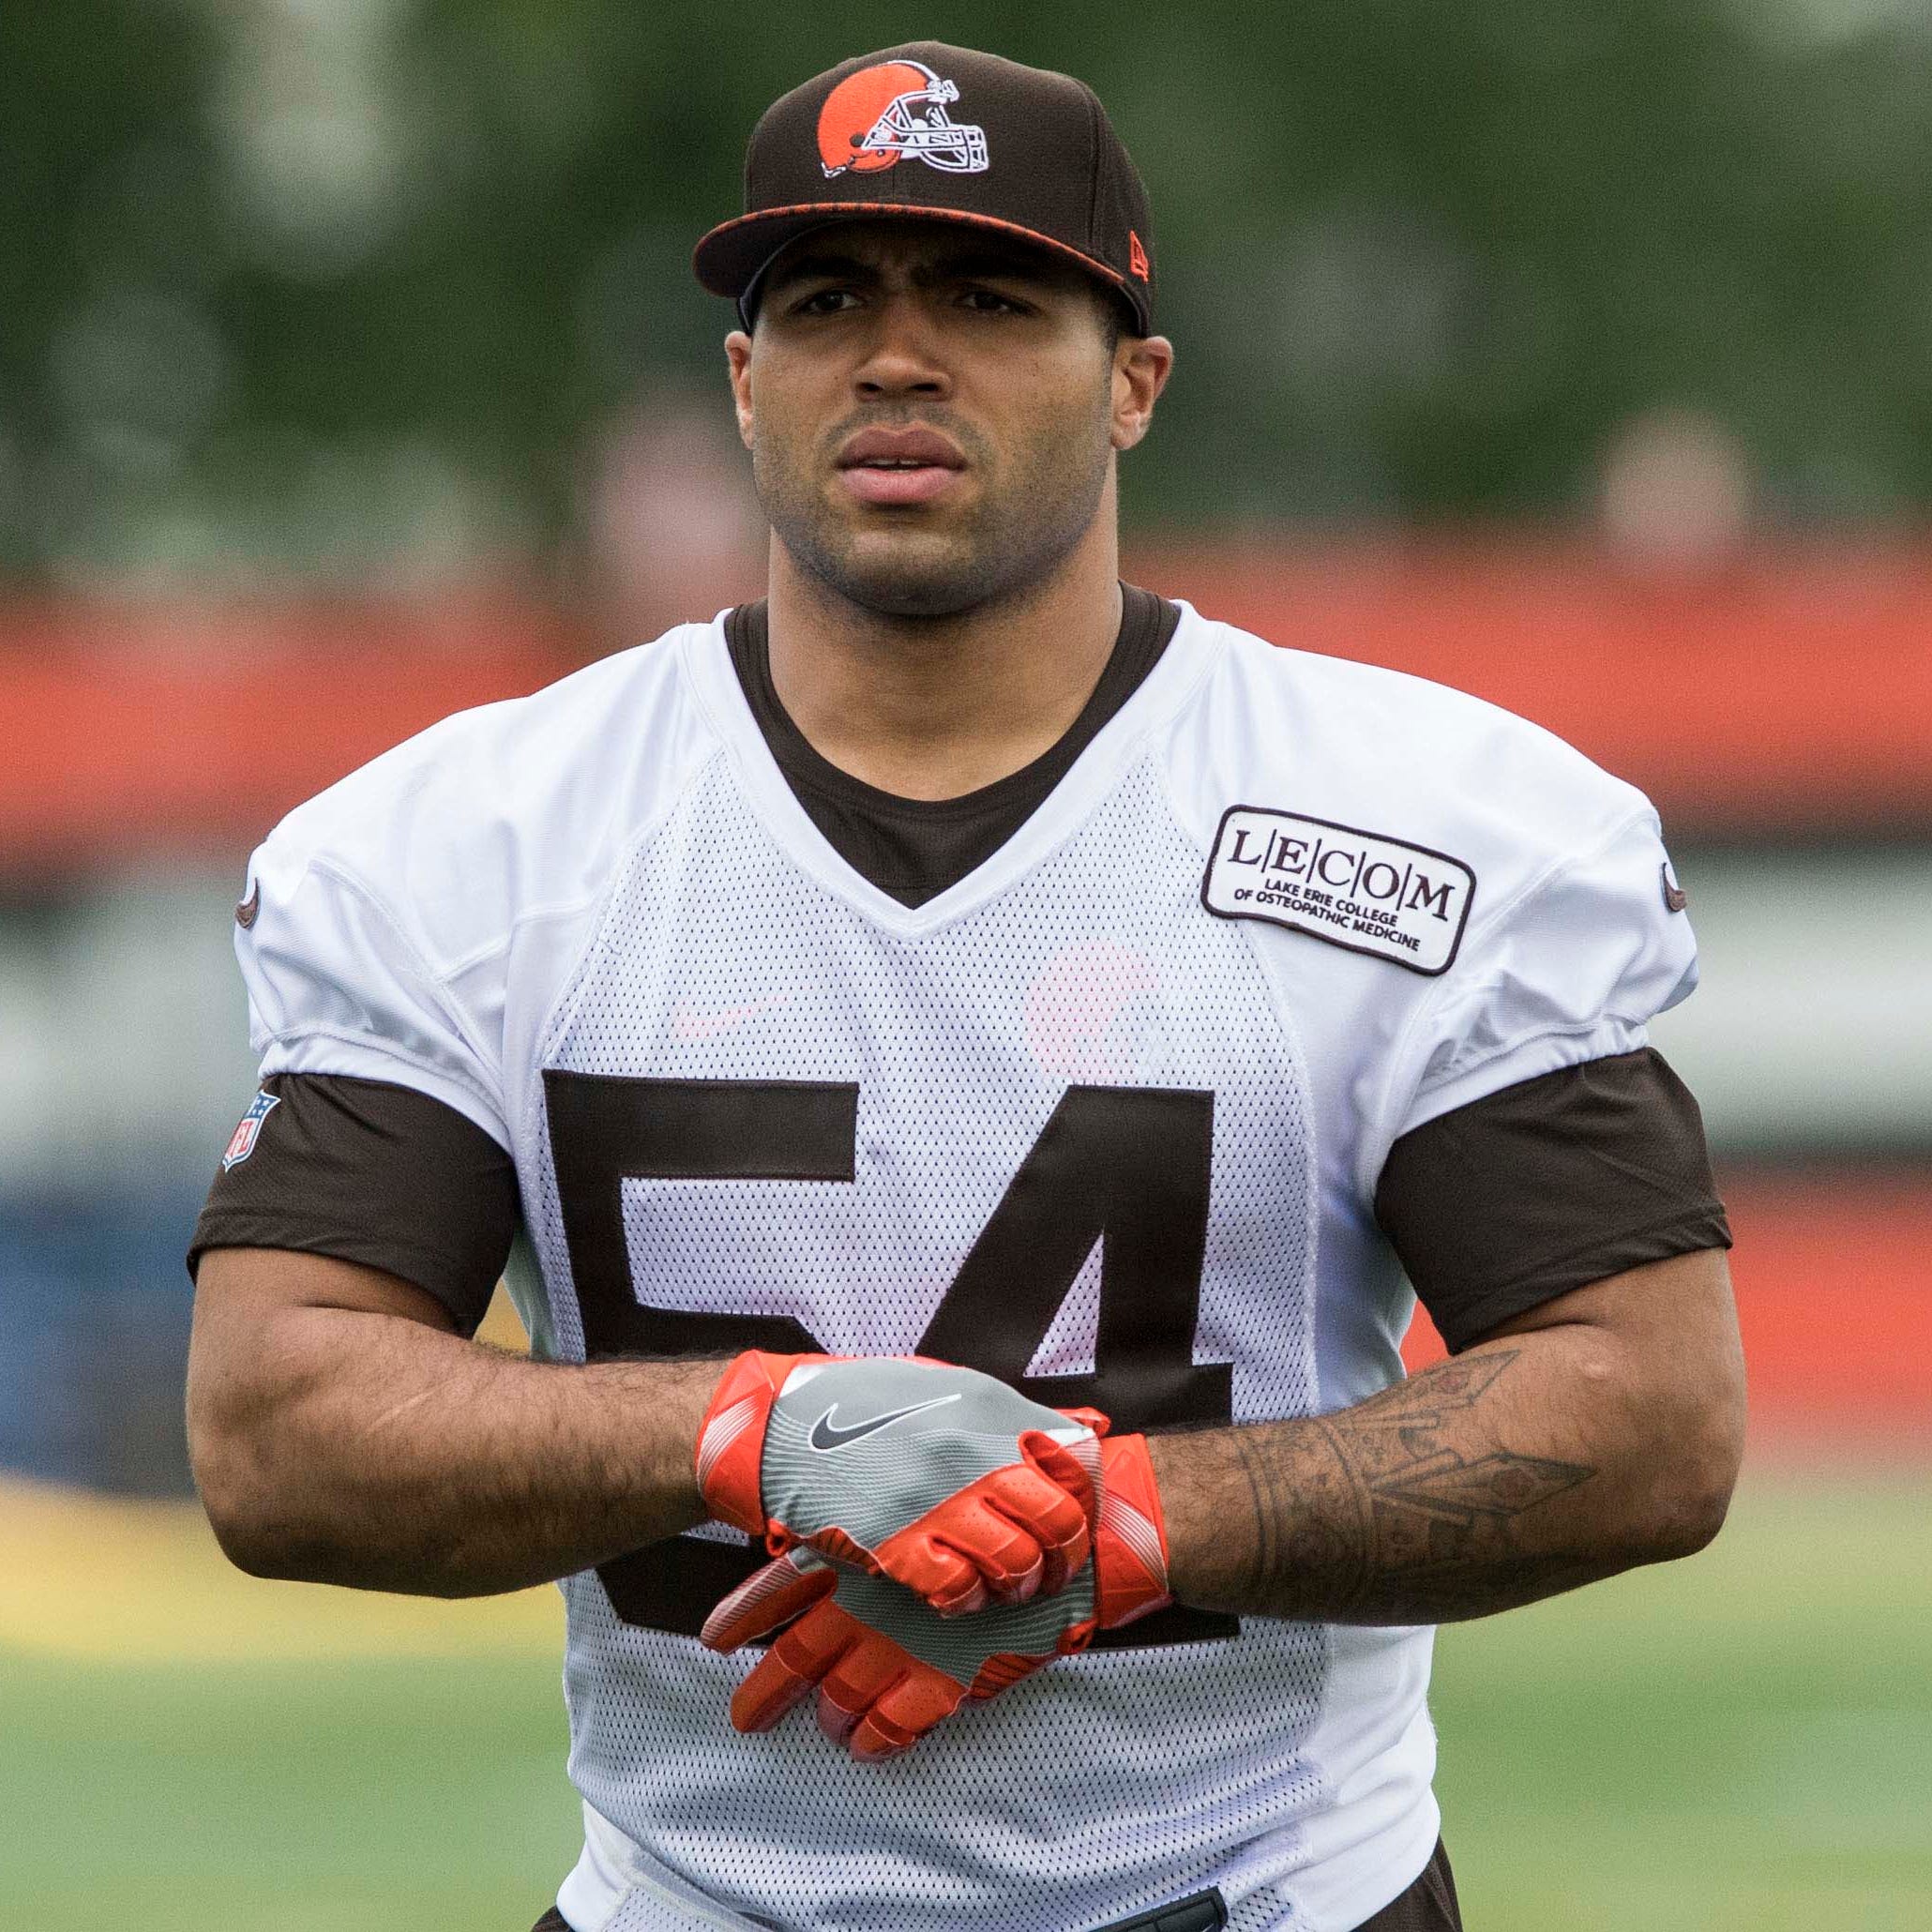 Cleveland Browns linebacker Mychal Kendricks (54) leaves the field after minicamp at the Cleveland Browns training facility.